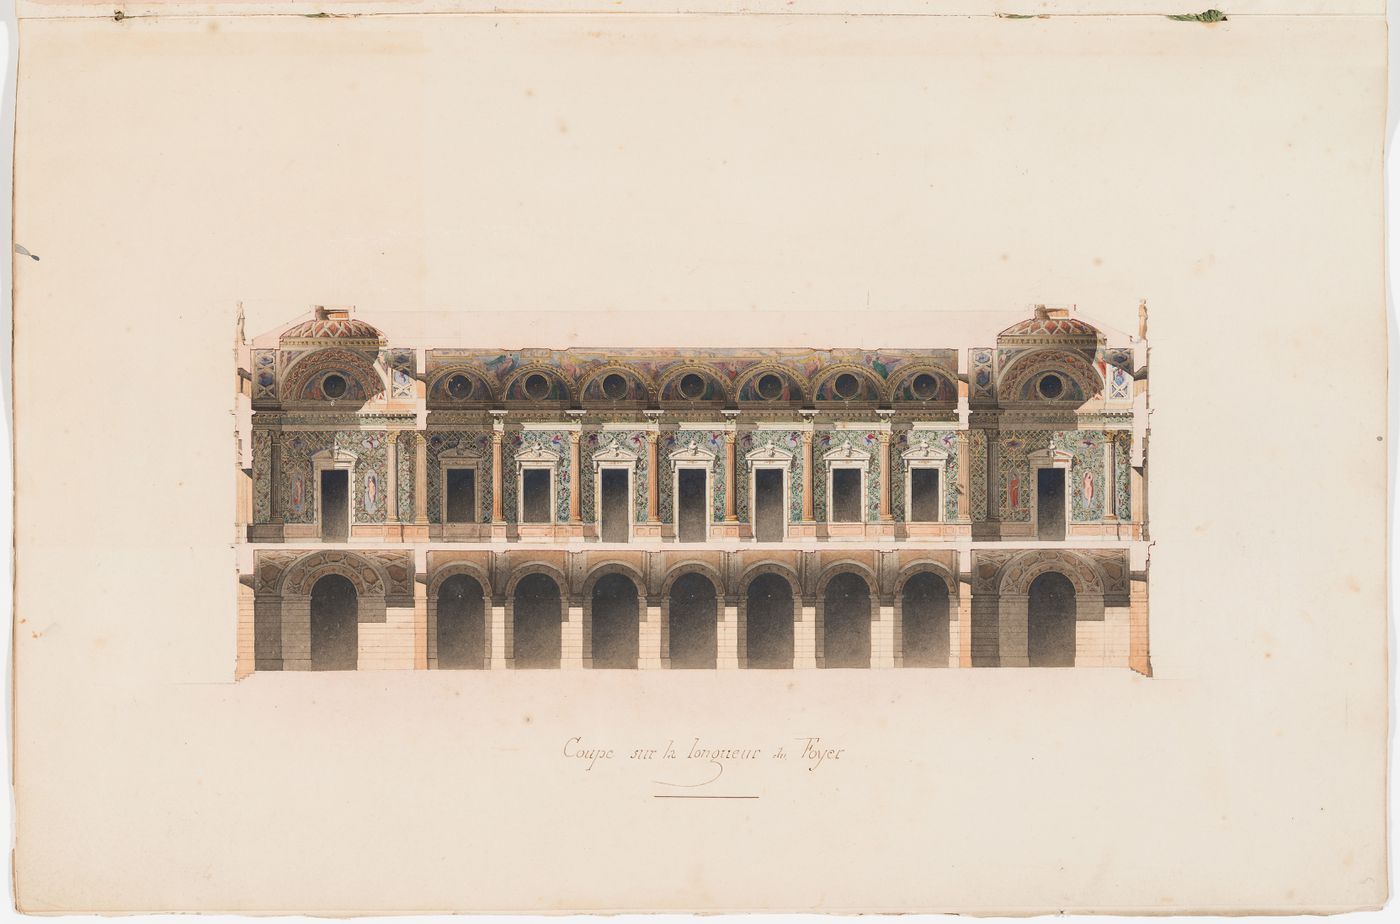 Longitudinal section for the "foyer" for an opera house for the Académie impériale de musique